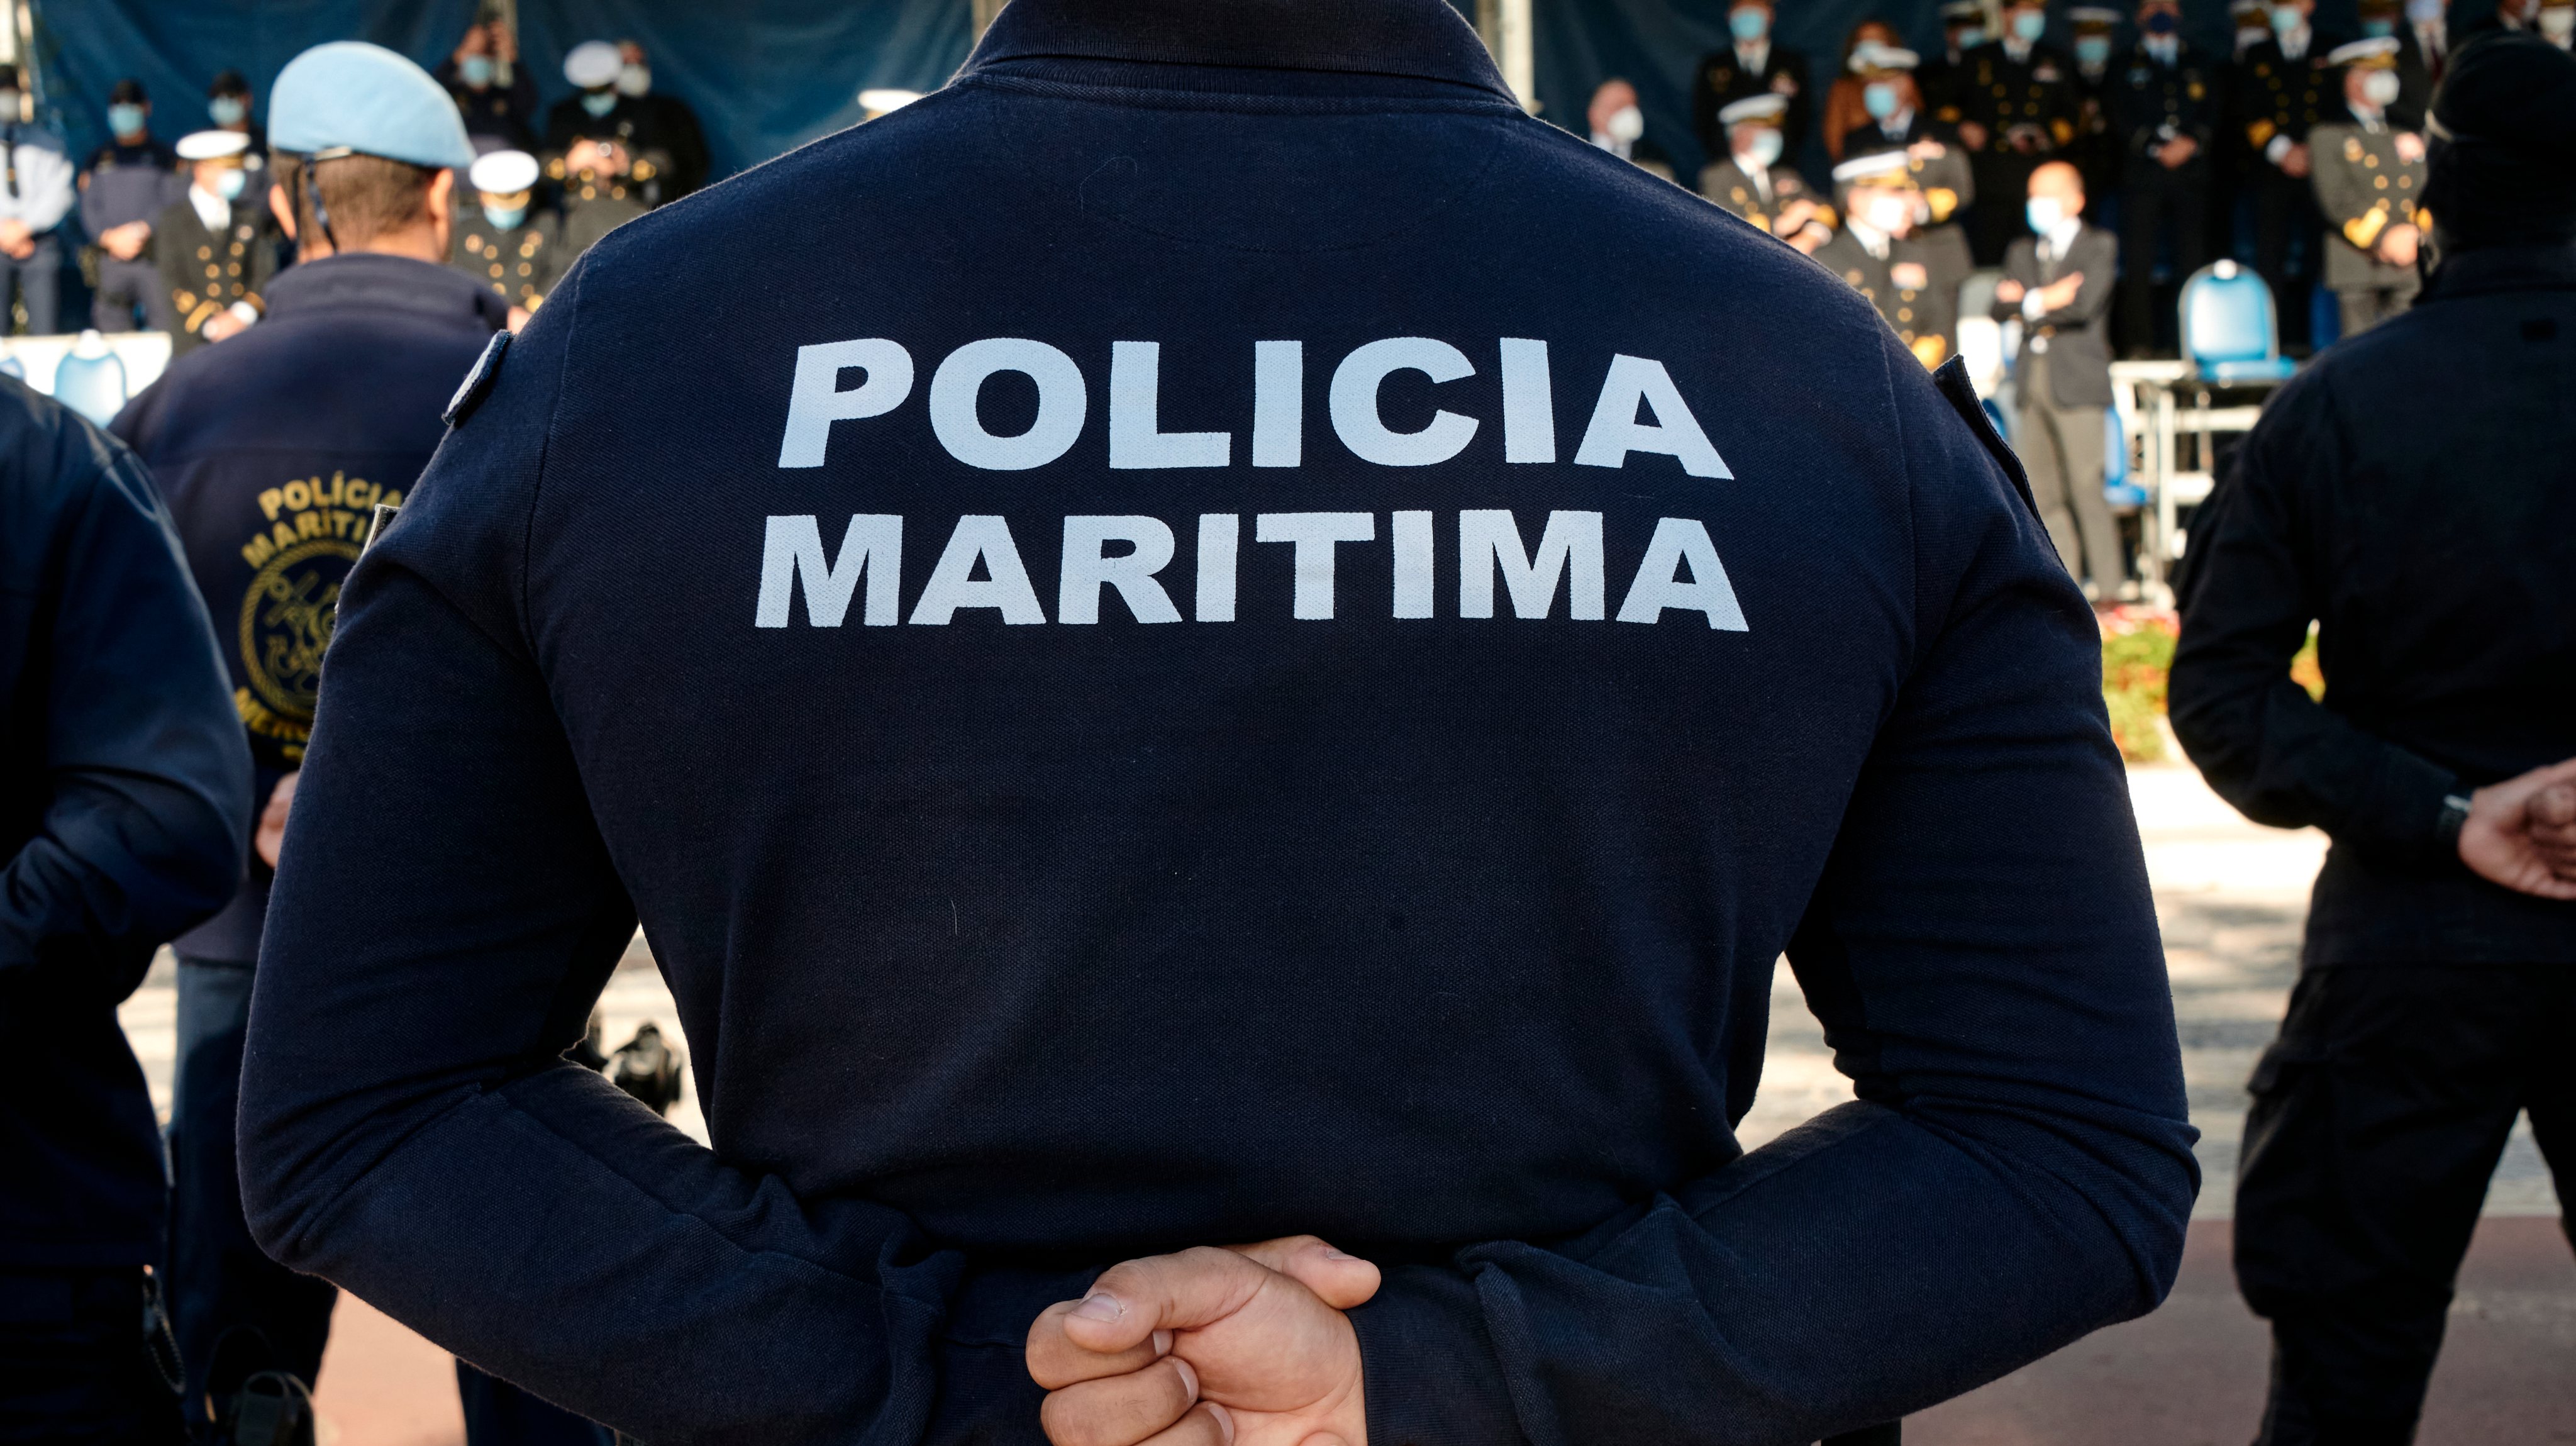 Commemoration Of The 102 Anniversary of Portugal&#039;s Maritime Police